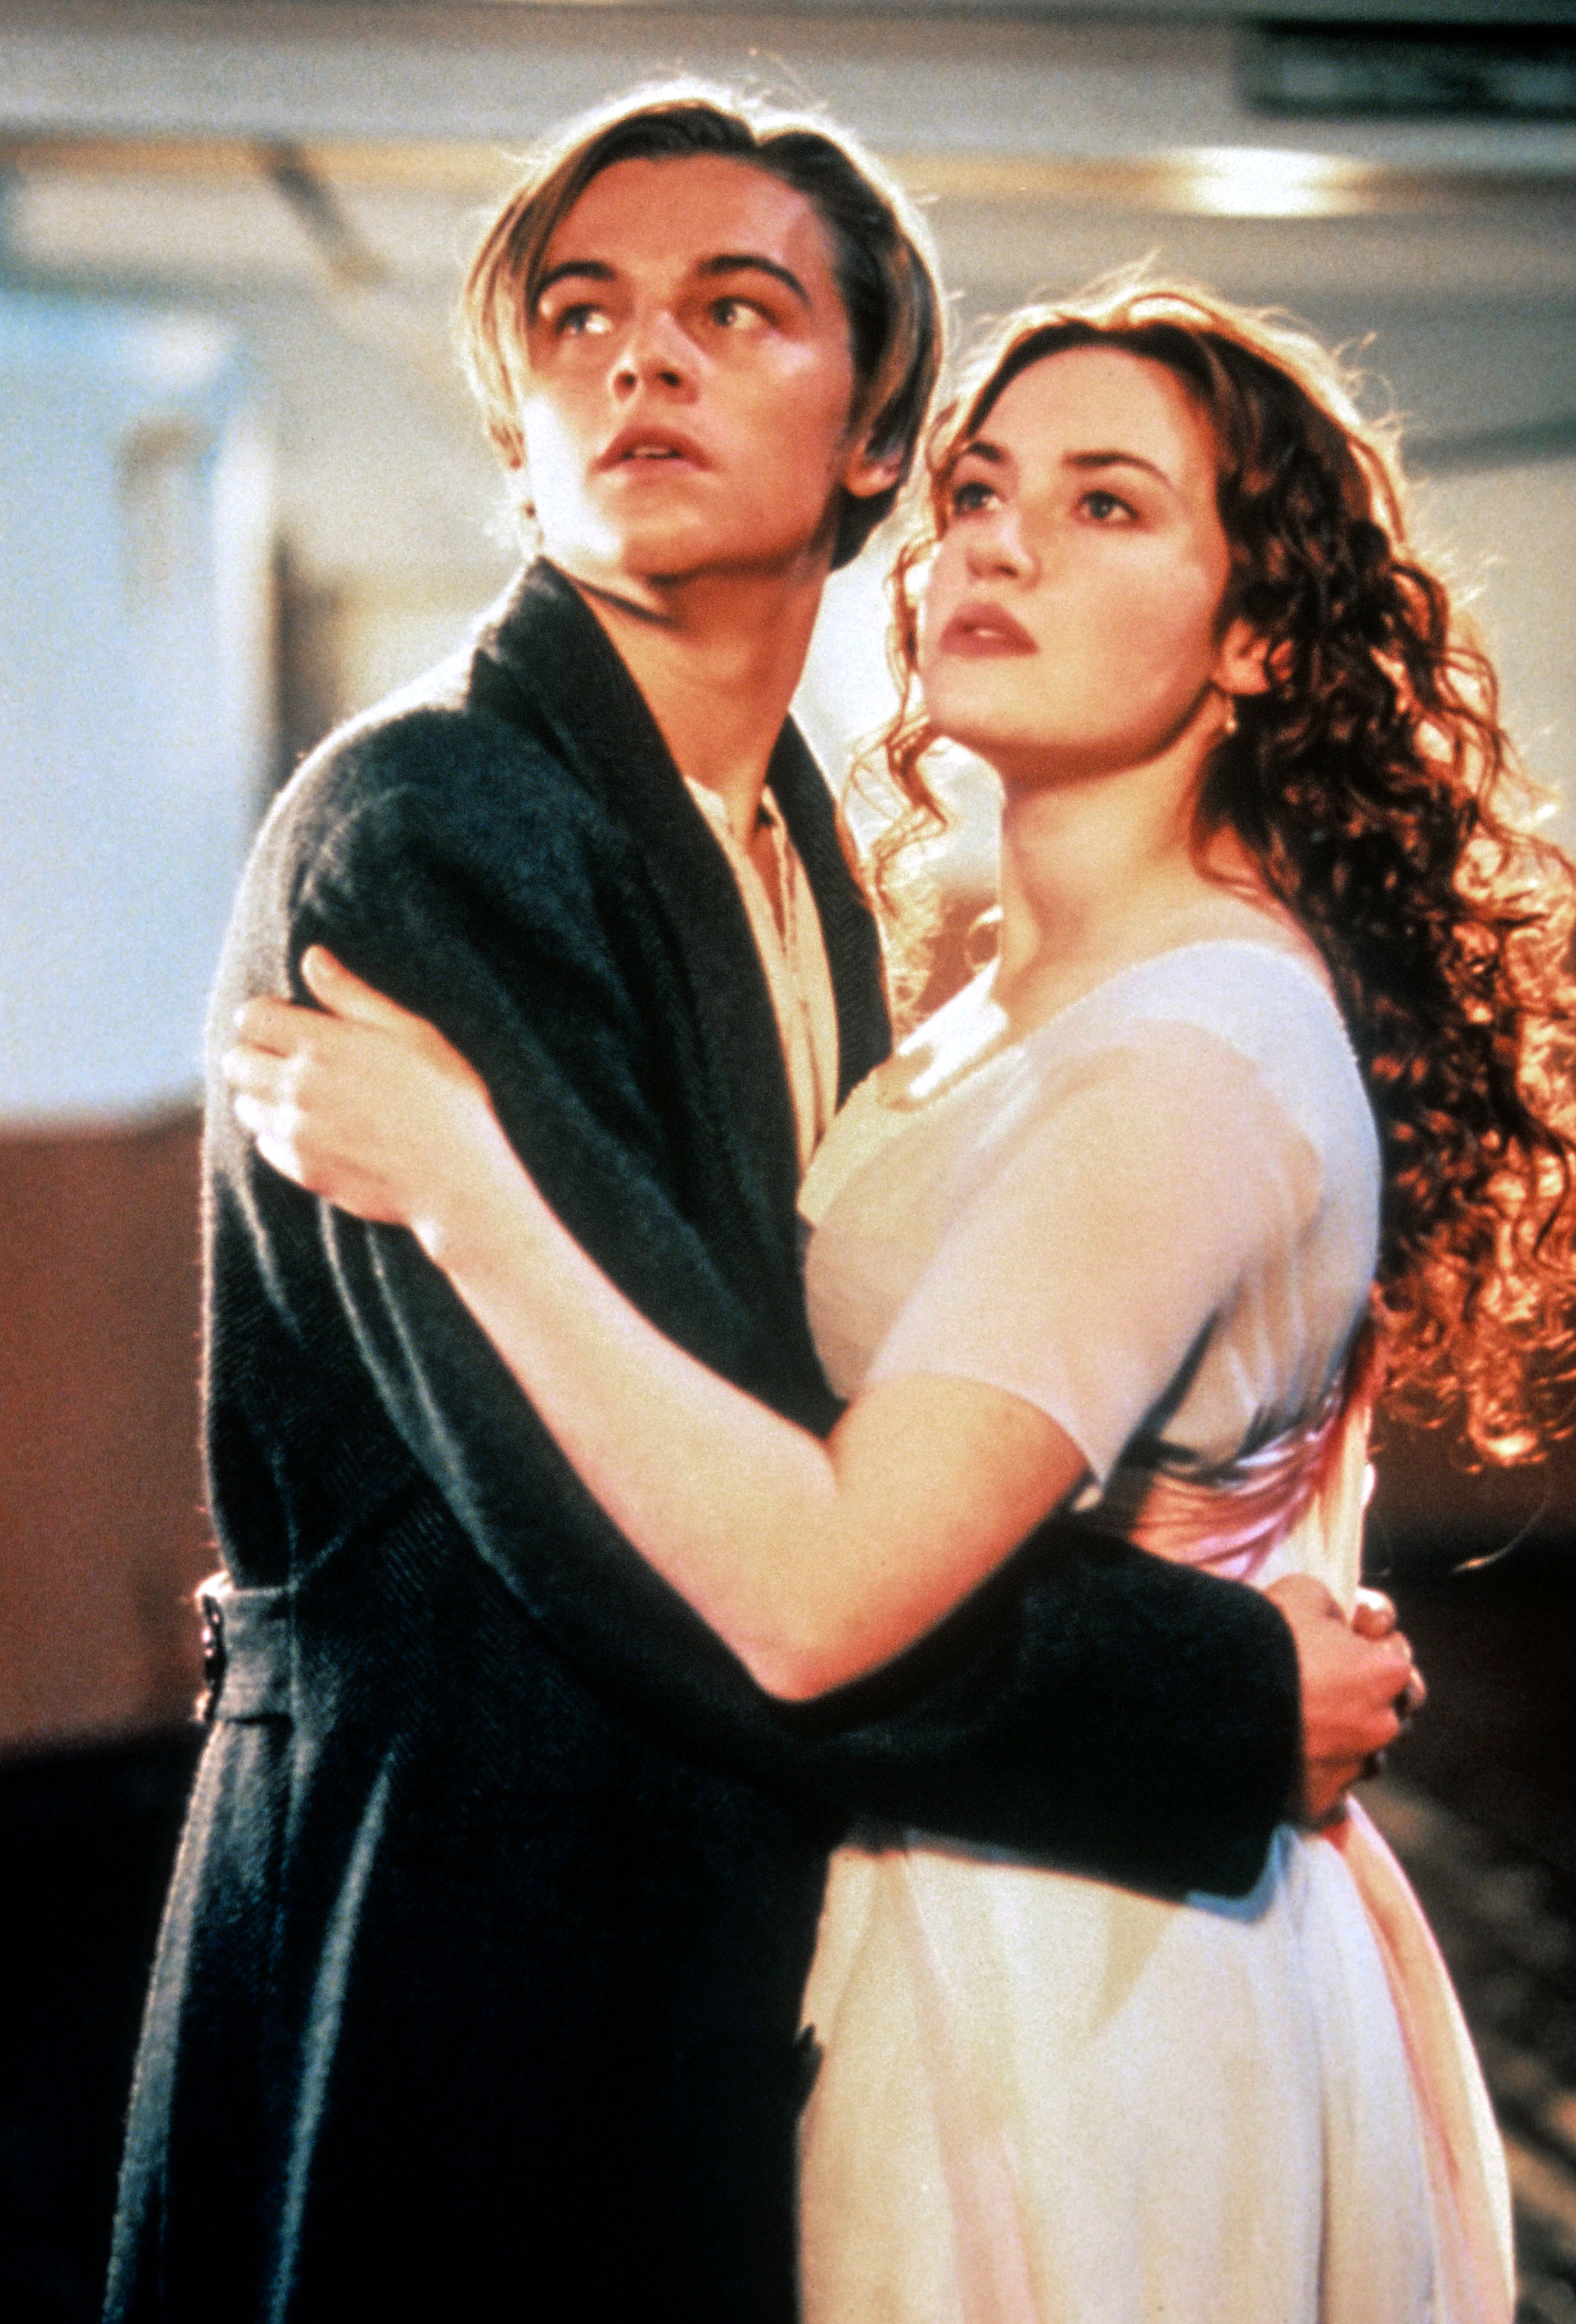 Kate Winslet On Titanic Door And People Criticising Her Weight